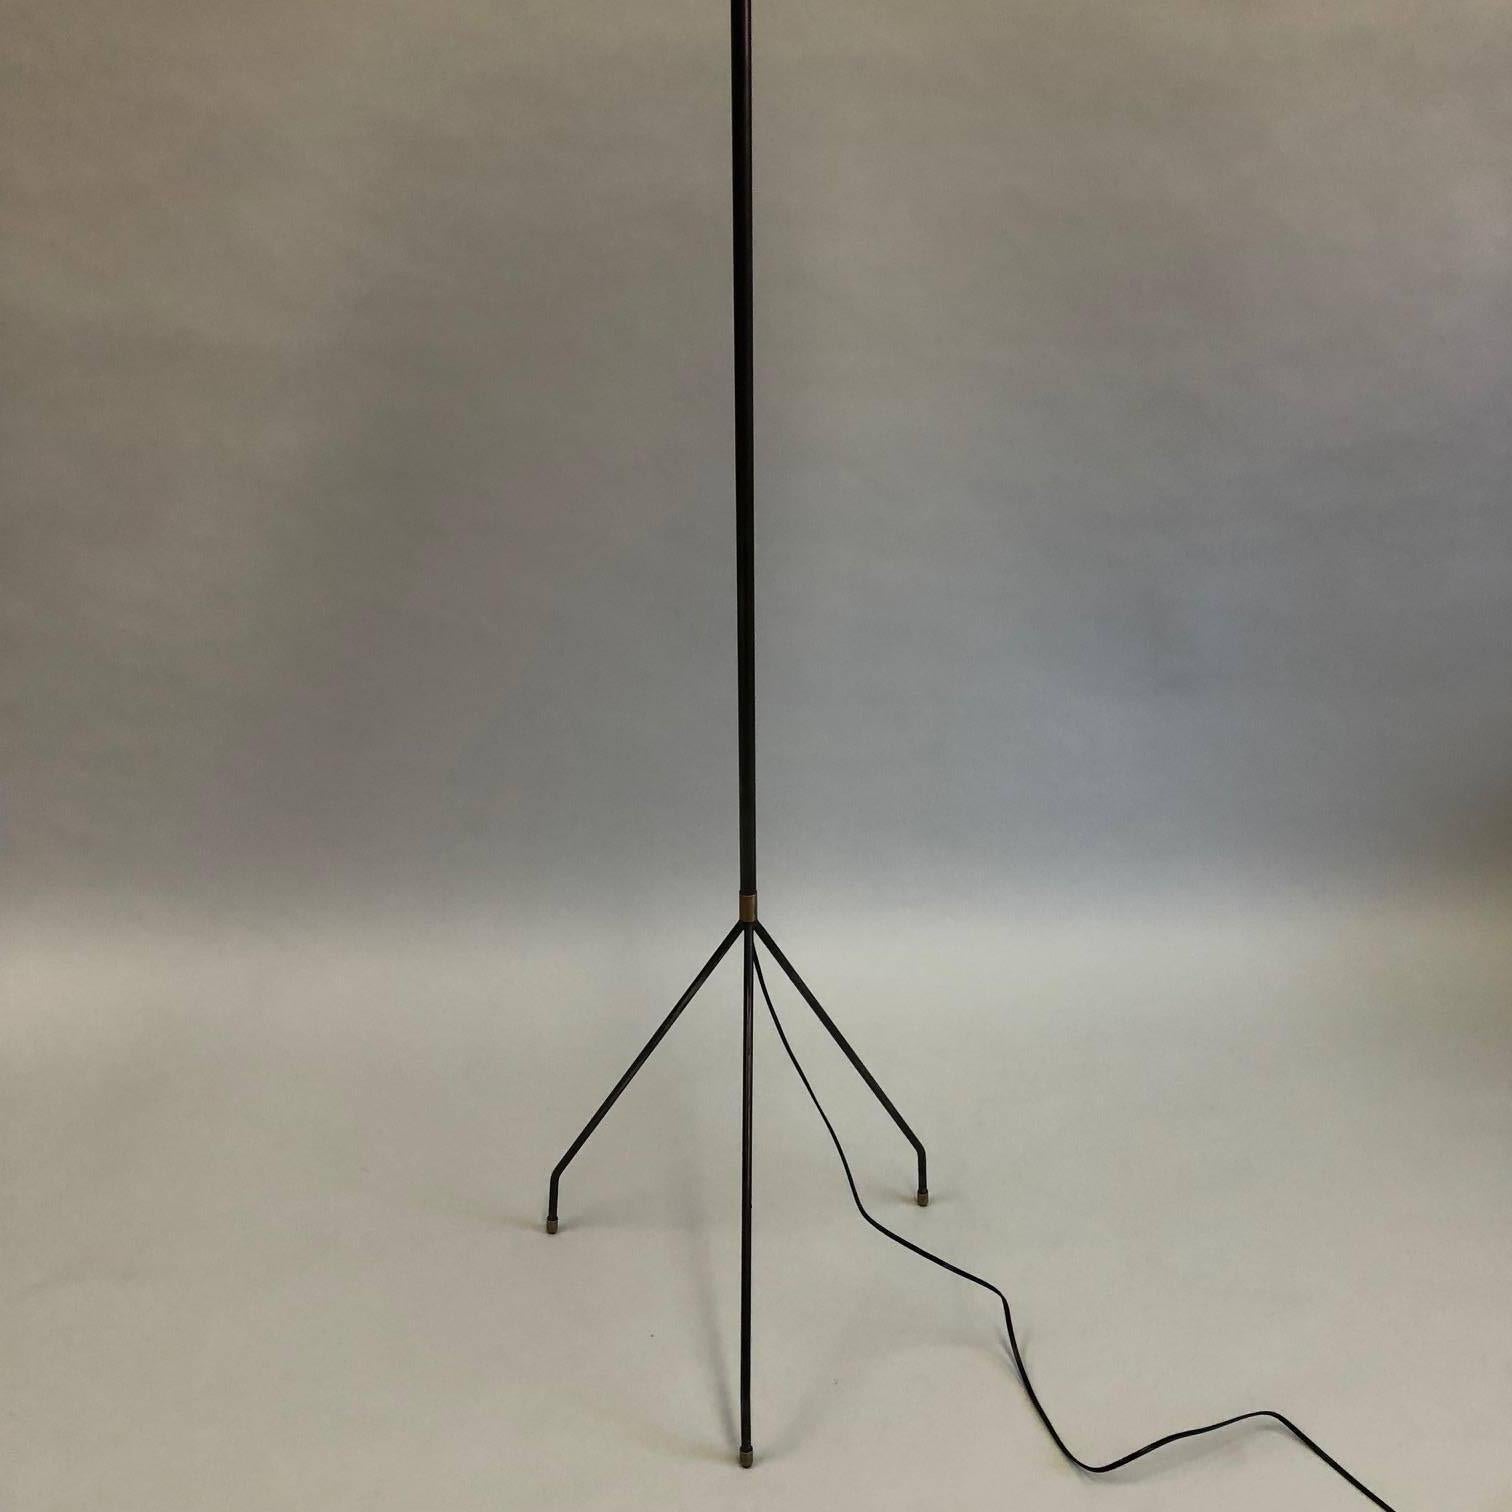 Pair of French Mid-Century Modern / Minimalist Iron Floor Lamps, Pierre Guariche In Good Condition For Sale In New York, NY